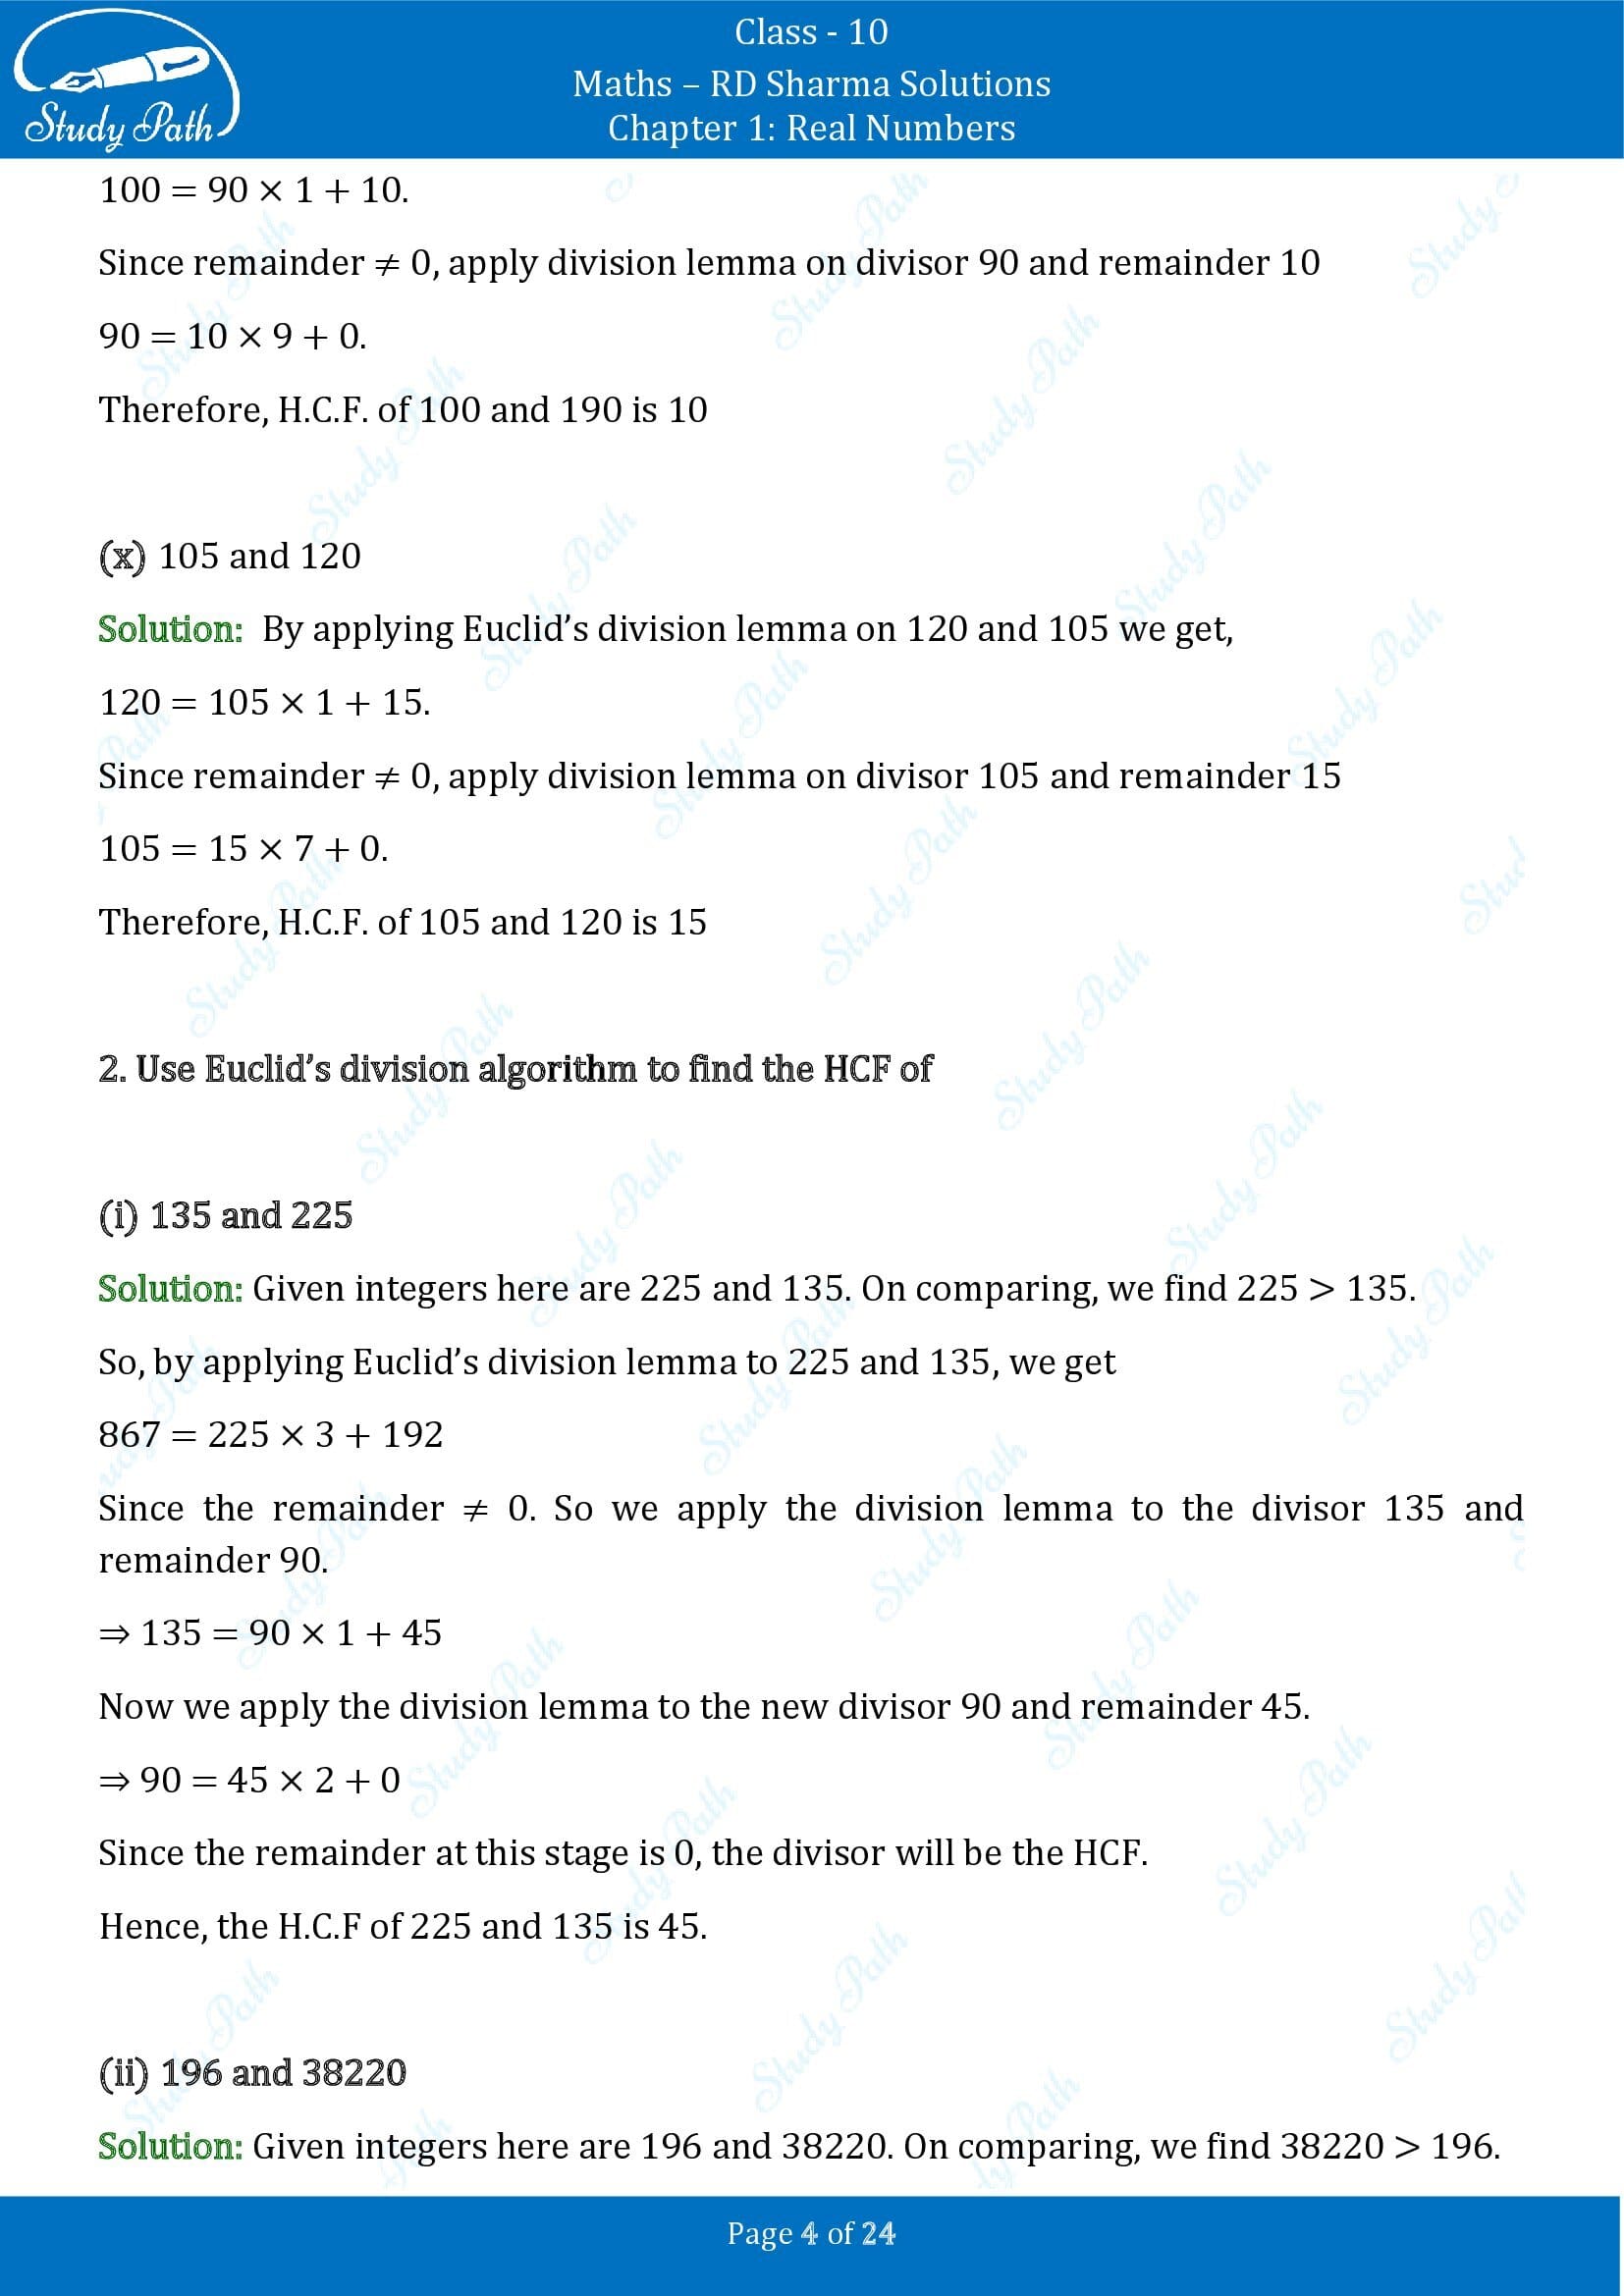 RD Sharma Solutions Class 10 Chapter 1 Real Numbers Exercise 1.2 00004